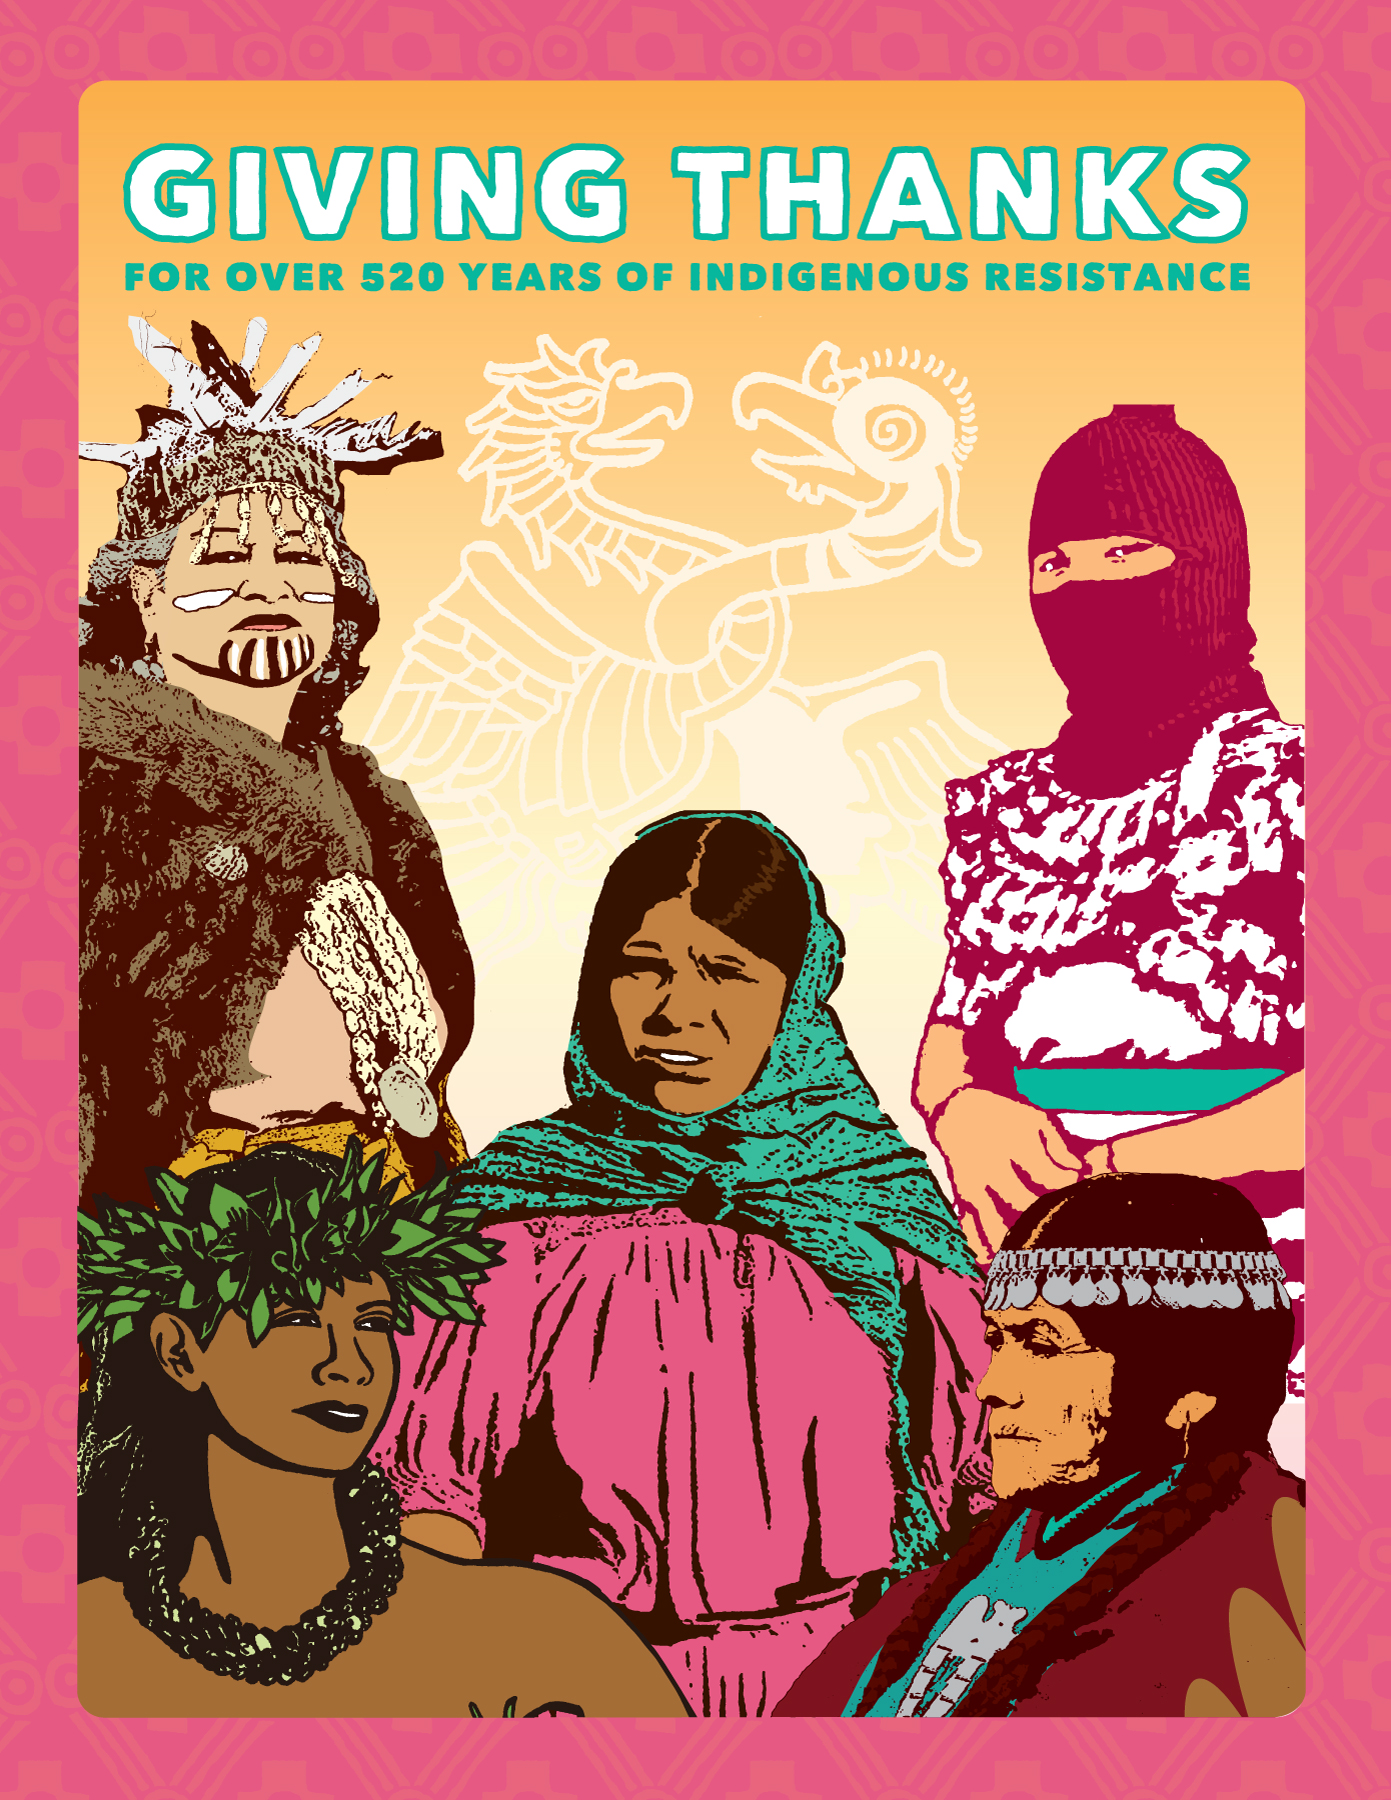 Giving thanks for over 520 years of indigenous resistence - work by Melanie Cervantes of Dignidad Rebelde